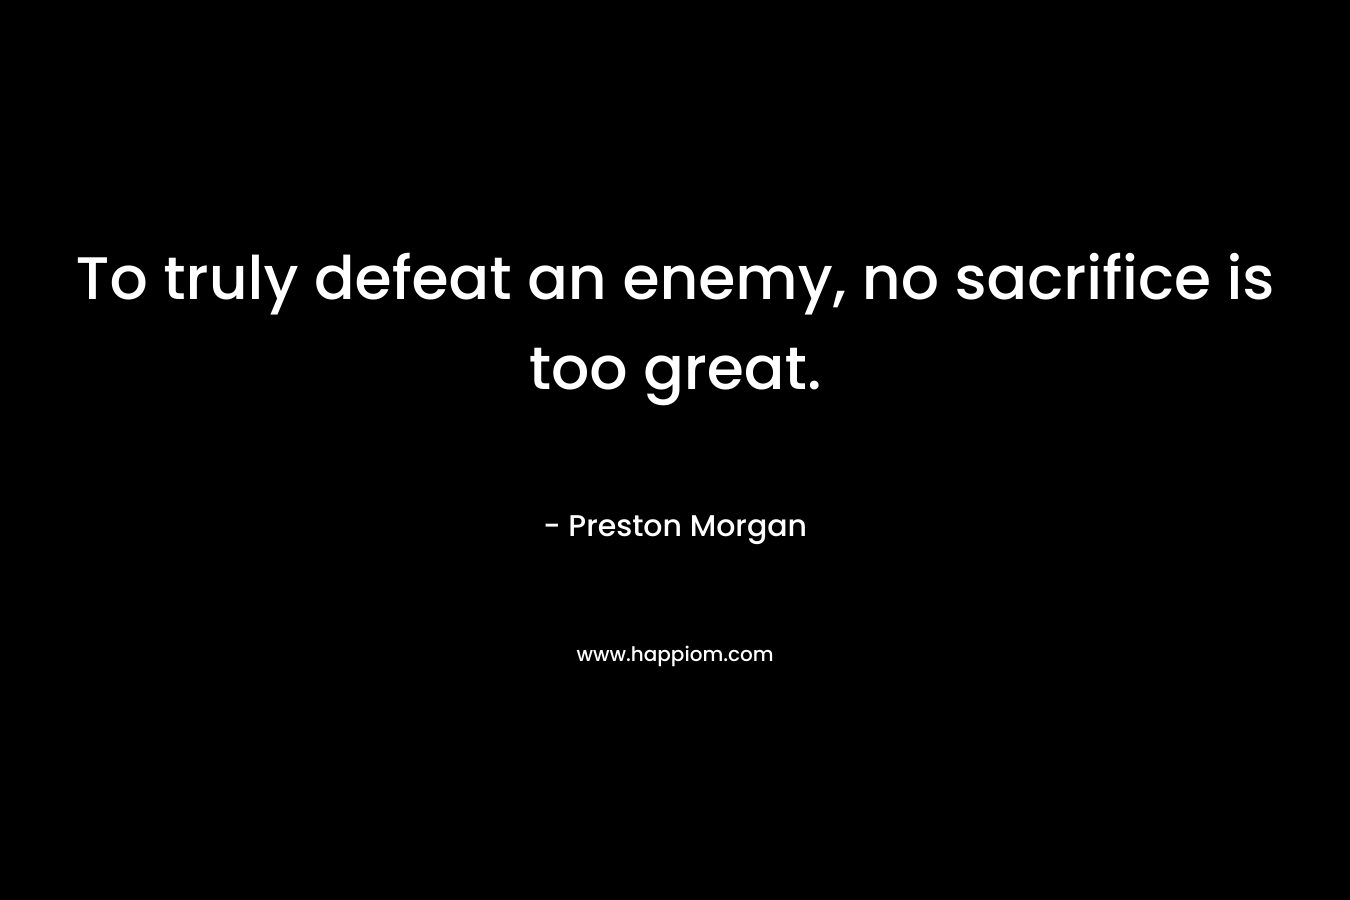 To truly defeat an enemy, no sacrifice is too great.